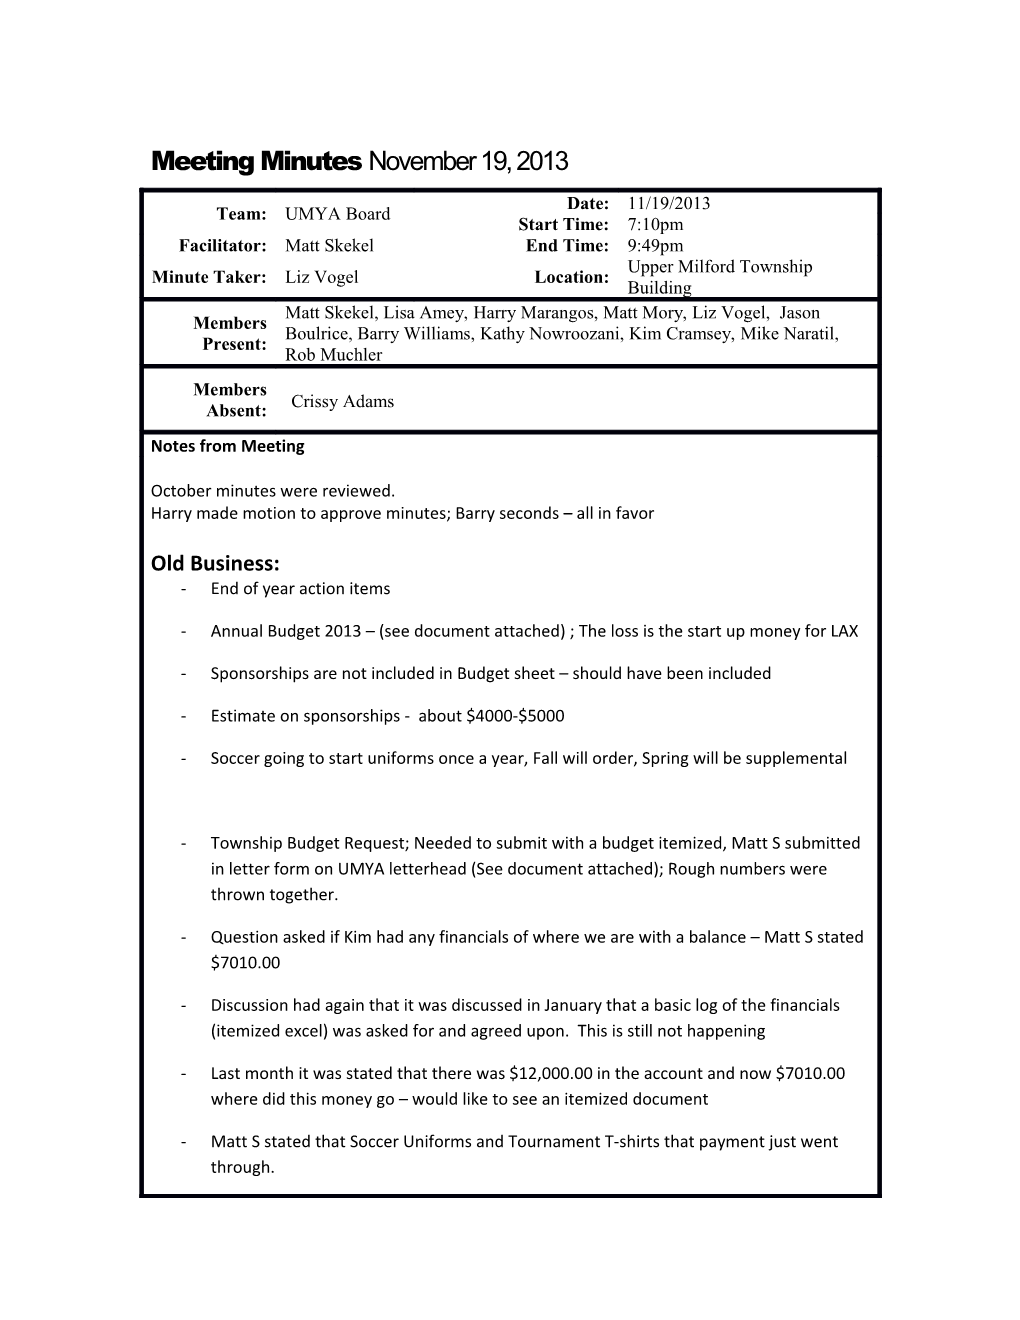 Meeting Minutes Template s2